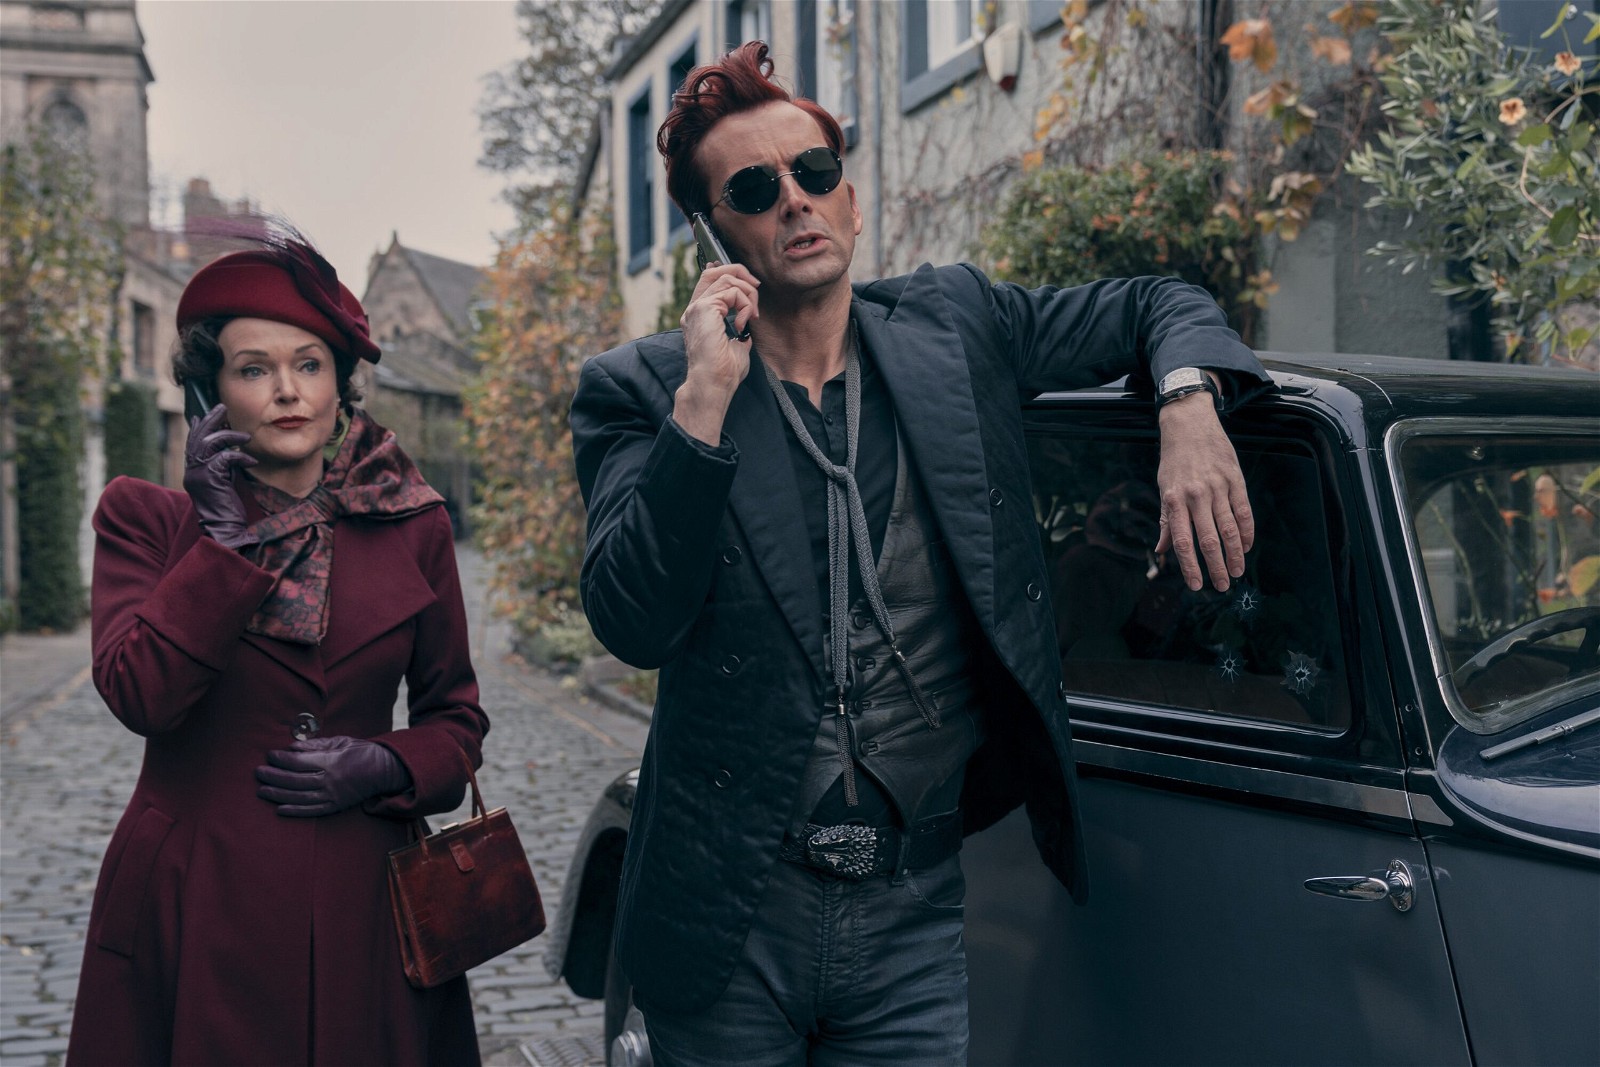 (L to R) Miranda Richardson as Shax and David Tennant as Crowle) in Good Omens 2